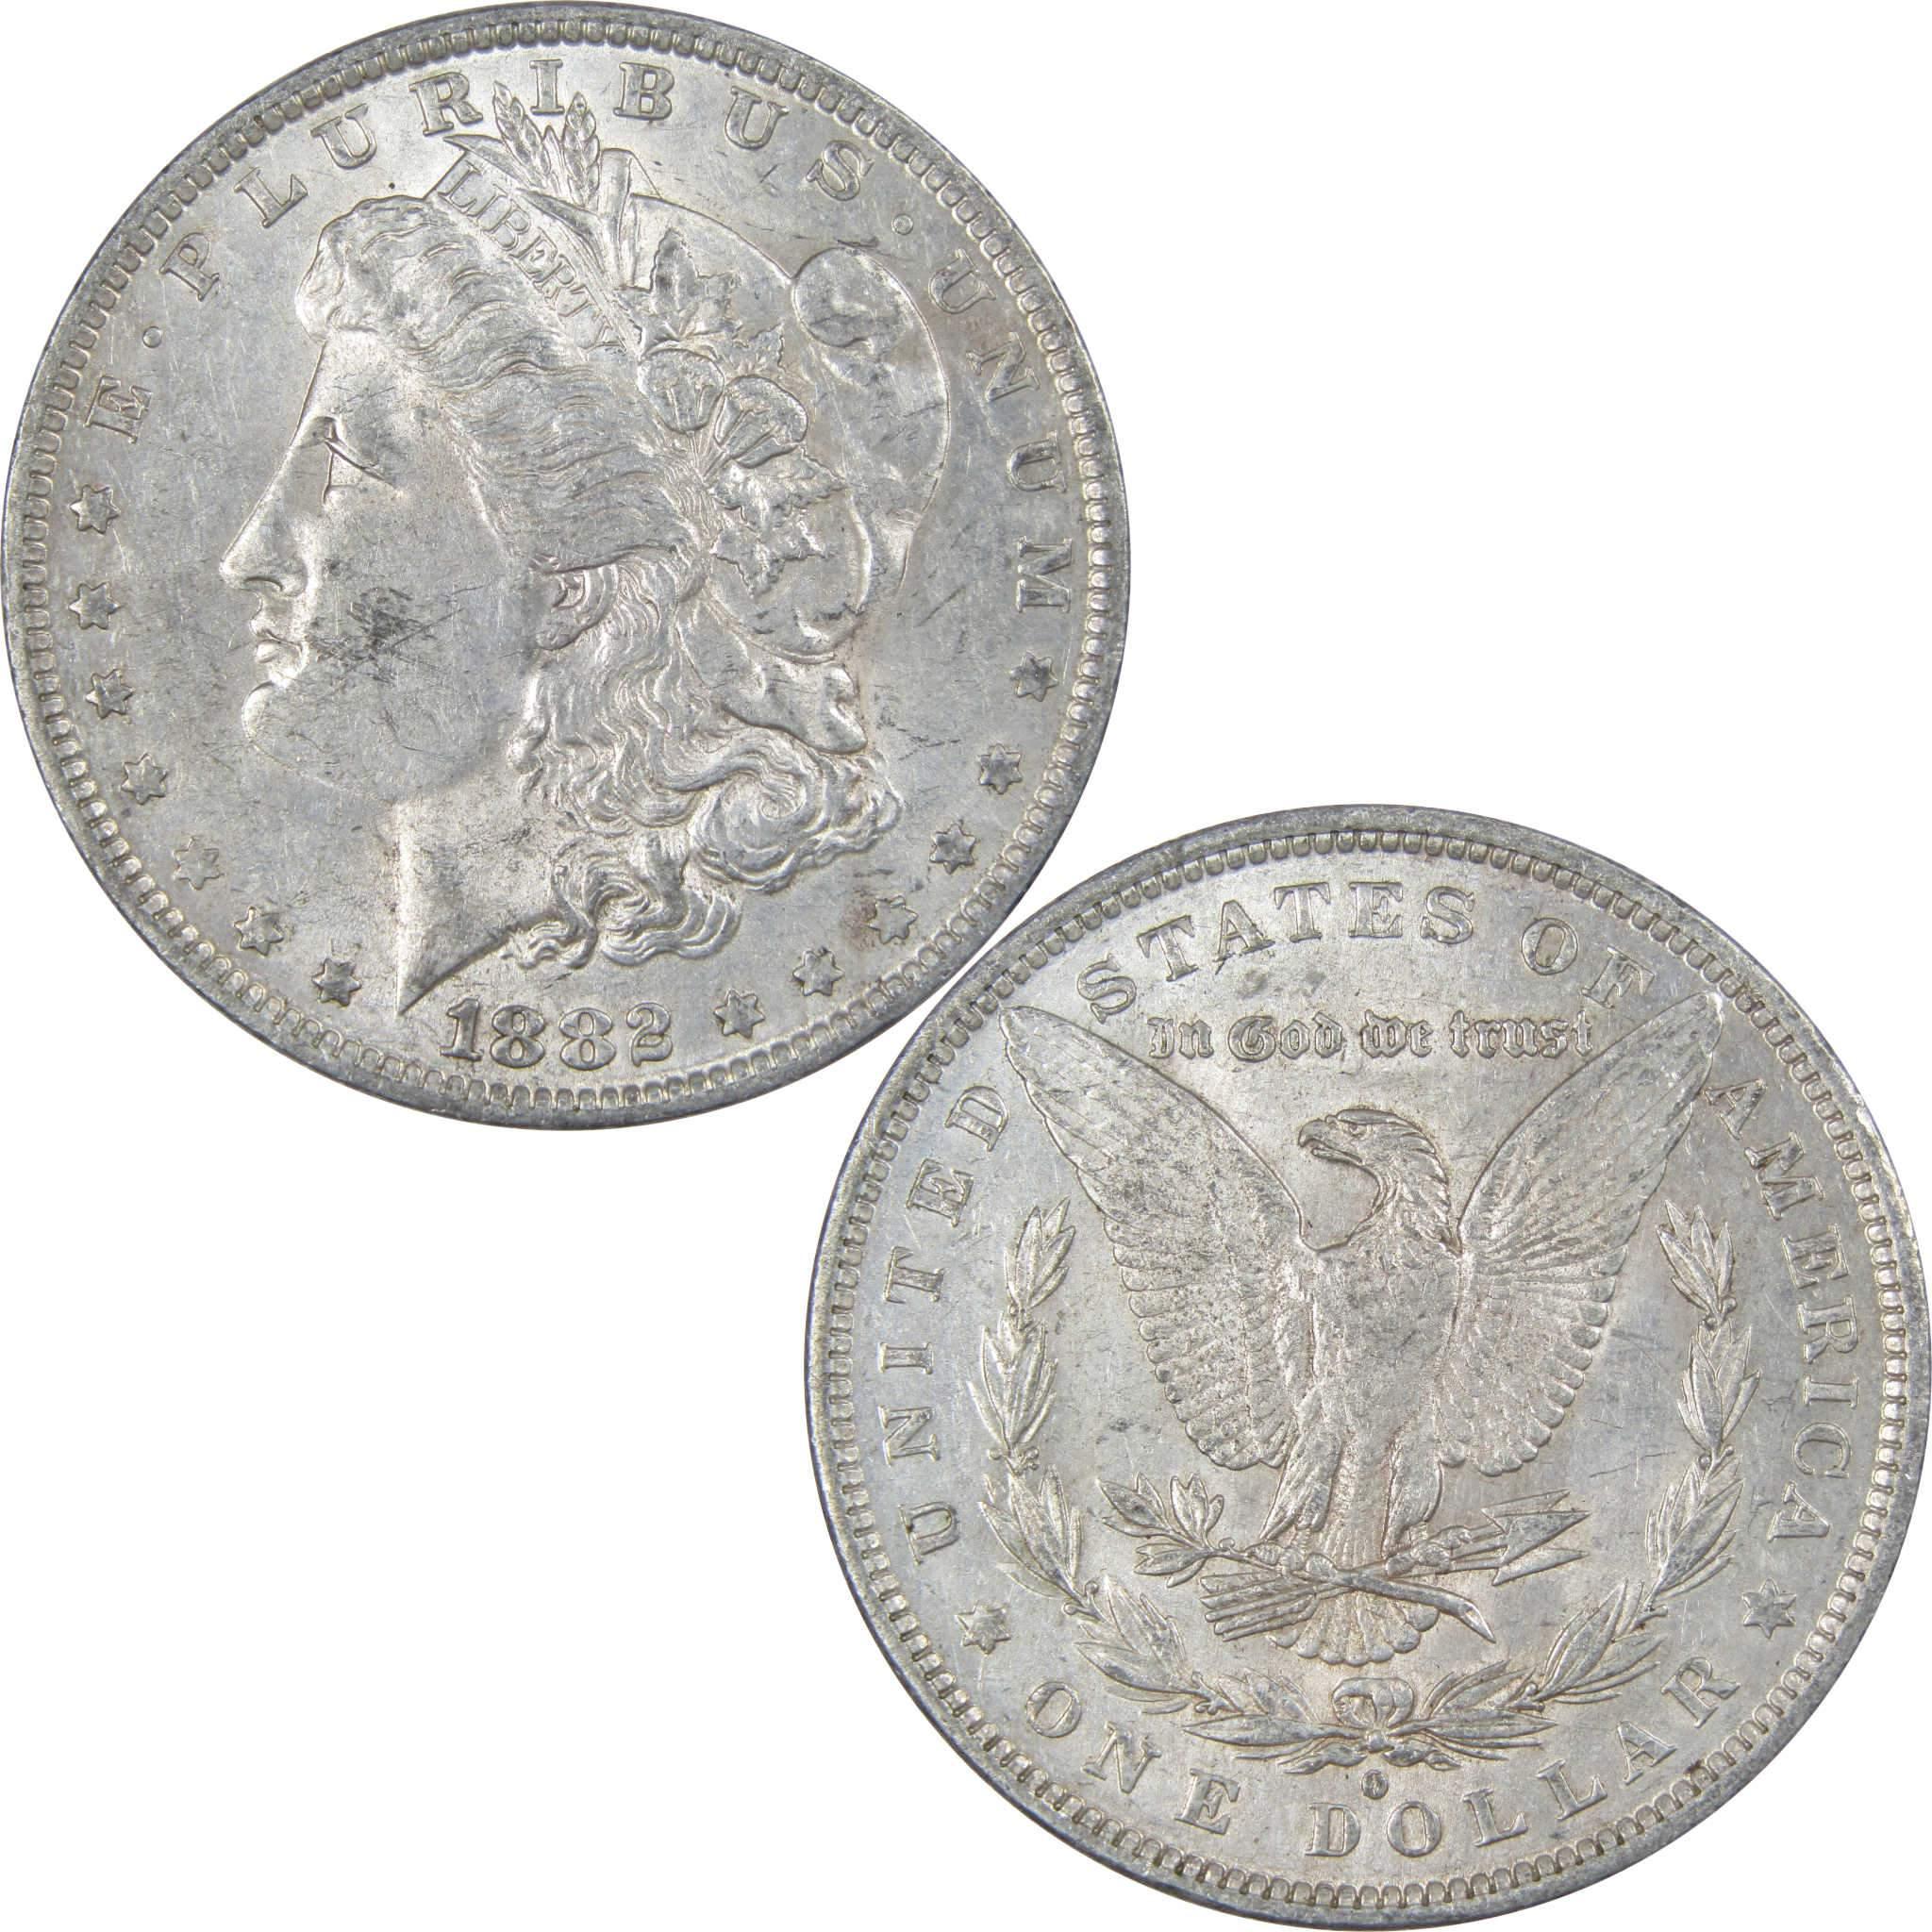 1882 O/S Morgan Dollar AU About Uncirculated 90% Silver SKU:IPC3673 - Morgan coin - Morgan silver dollar - Morgan silver dollar for sale - Profile Coins &amp; Collectibles